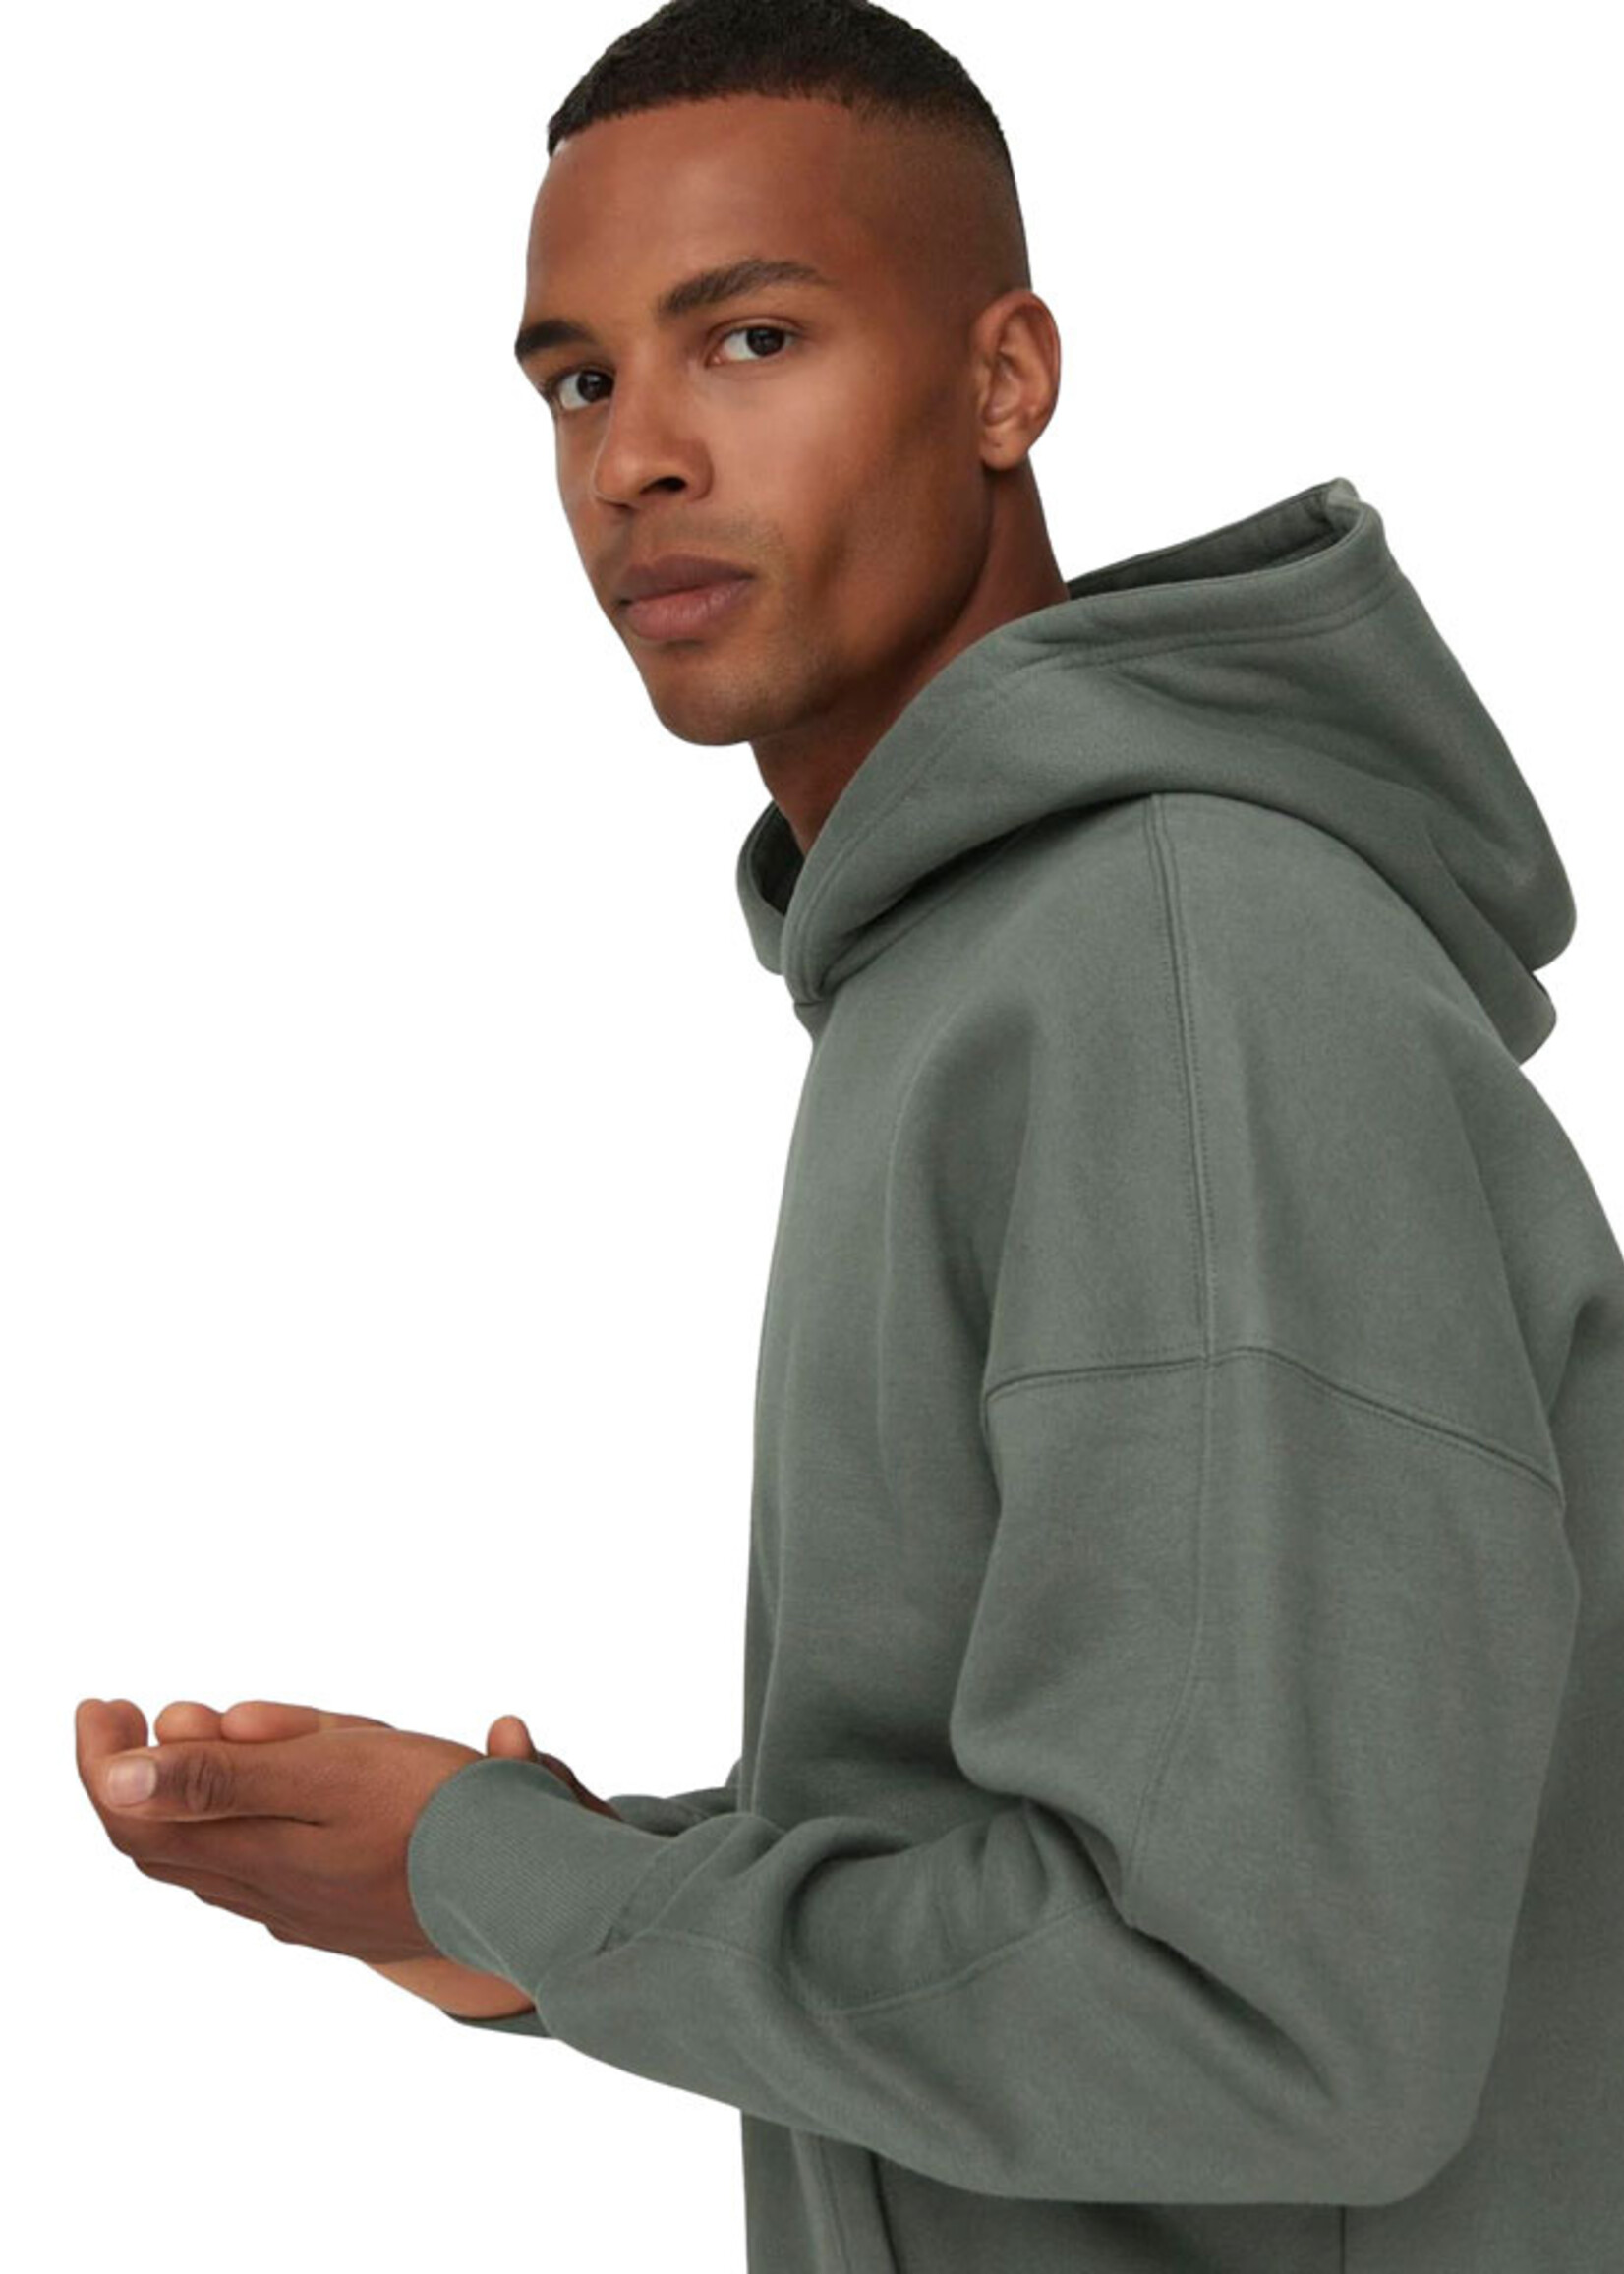 Only & Sons Den Life Relaxed Heavy Sweat Hoodie Castor Gray